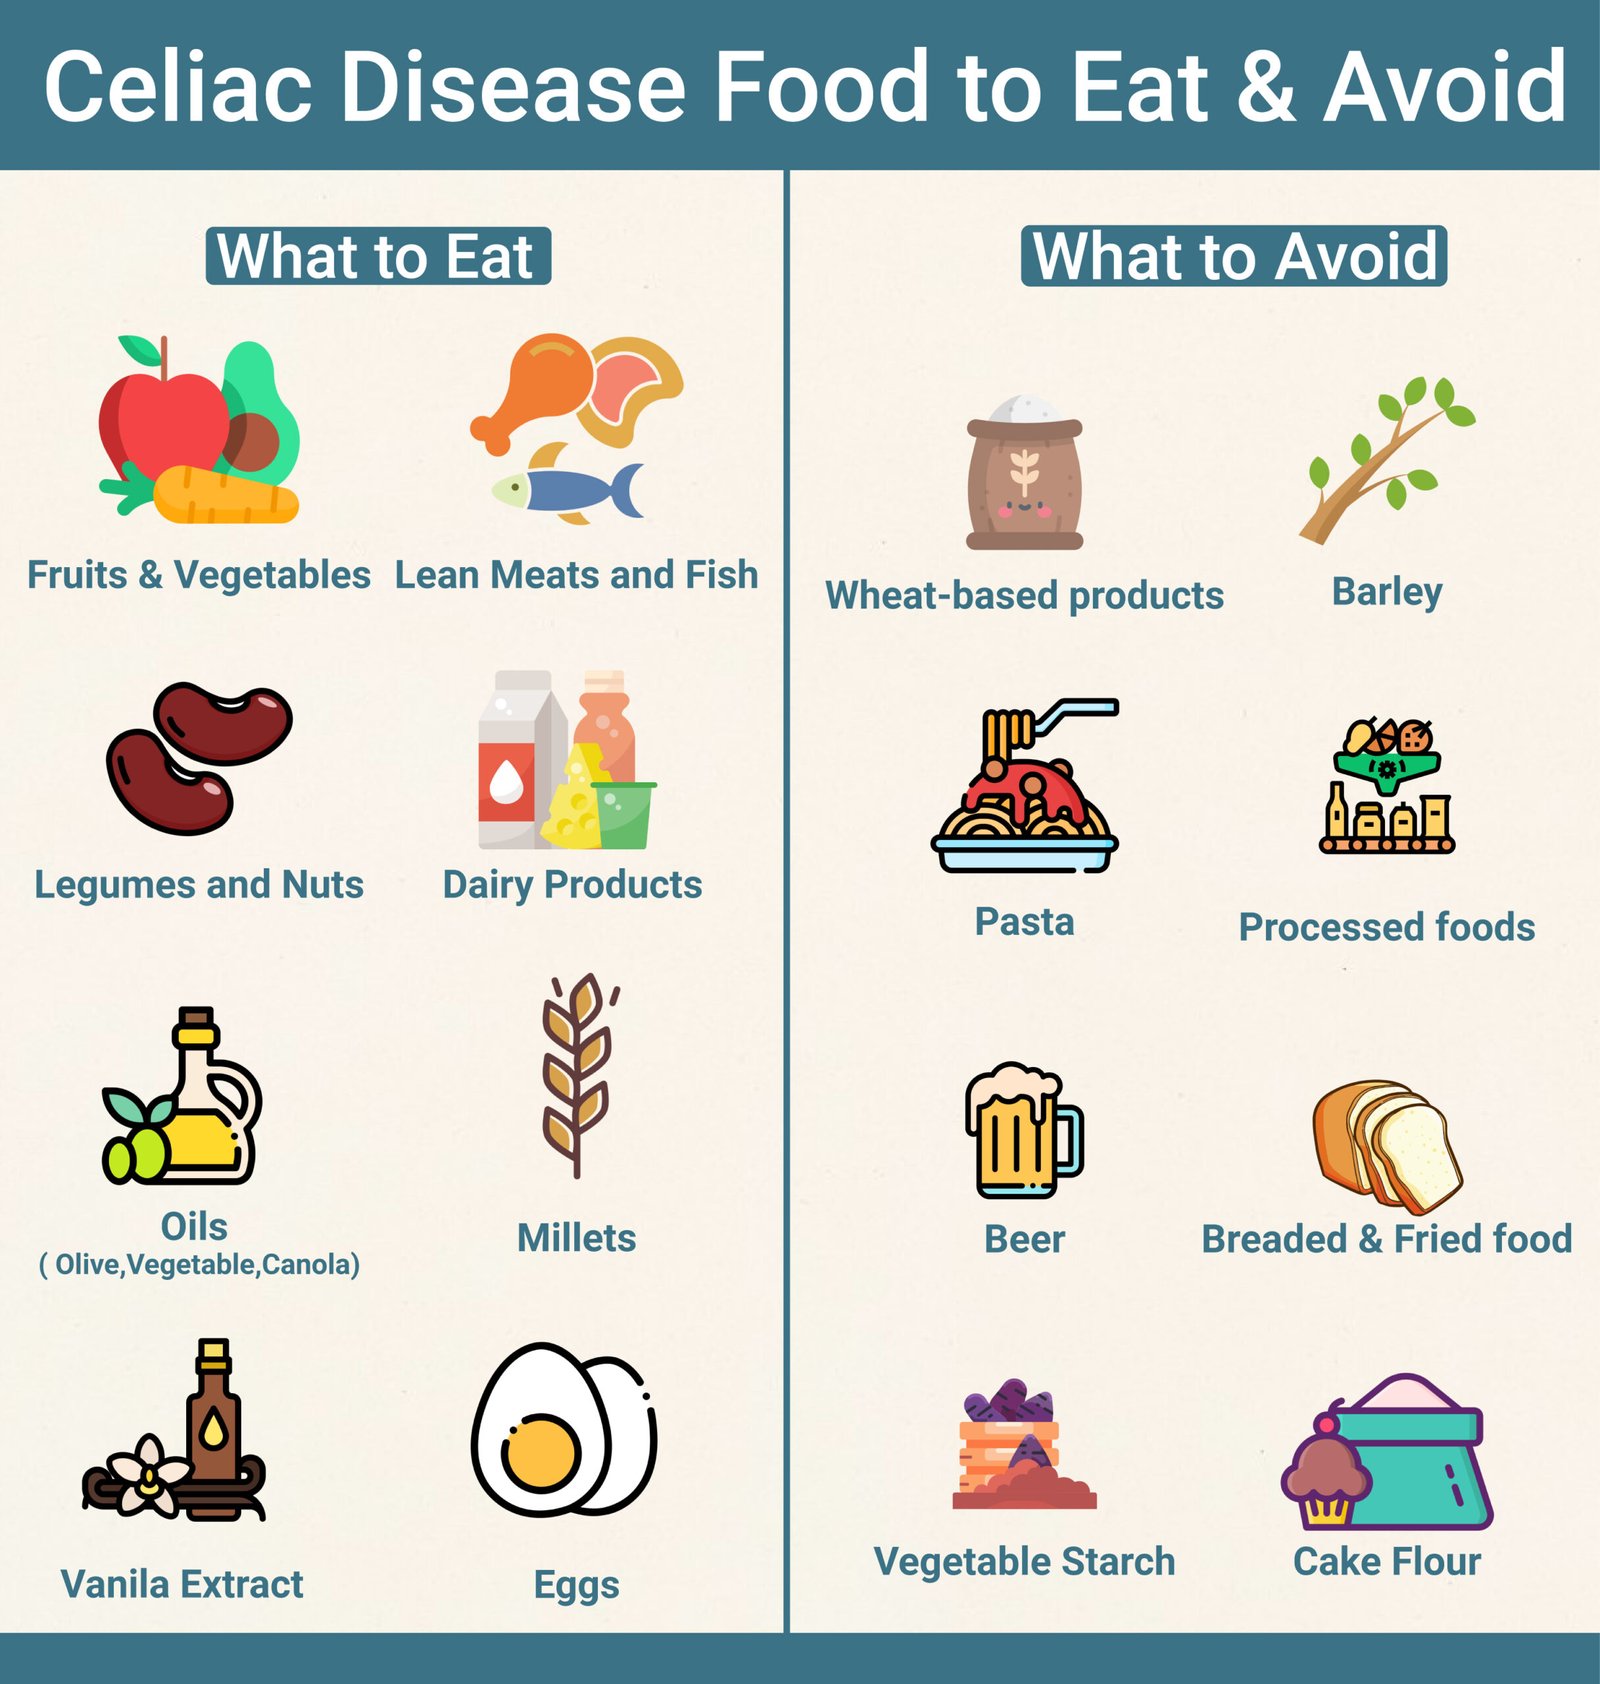 Celiac Disease and Diet: What to Eat and What to Avoid